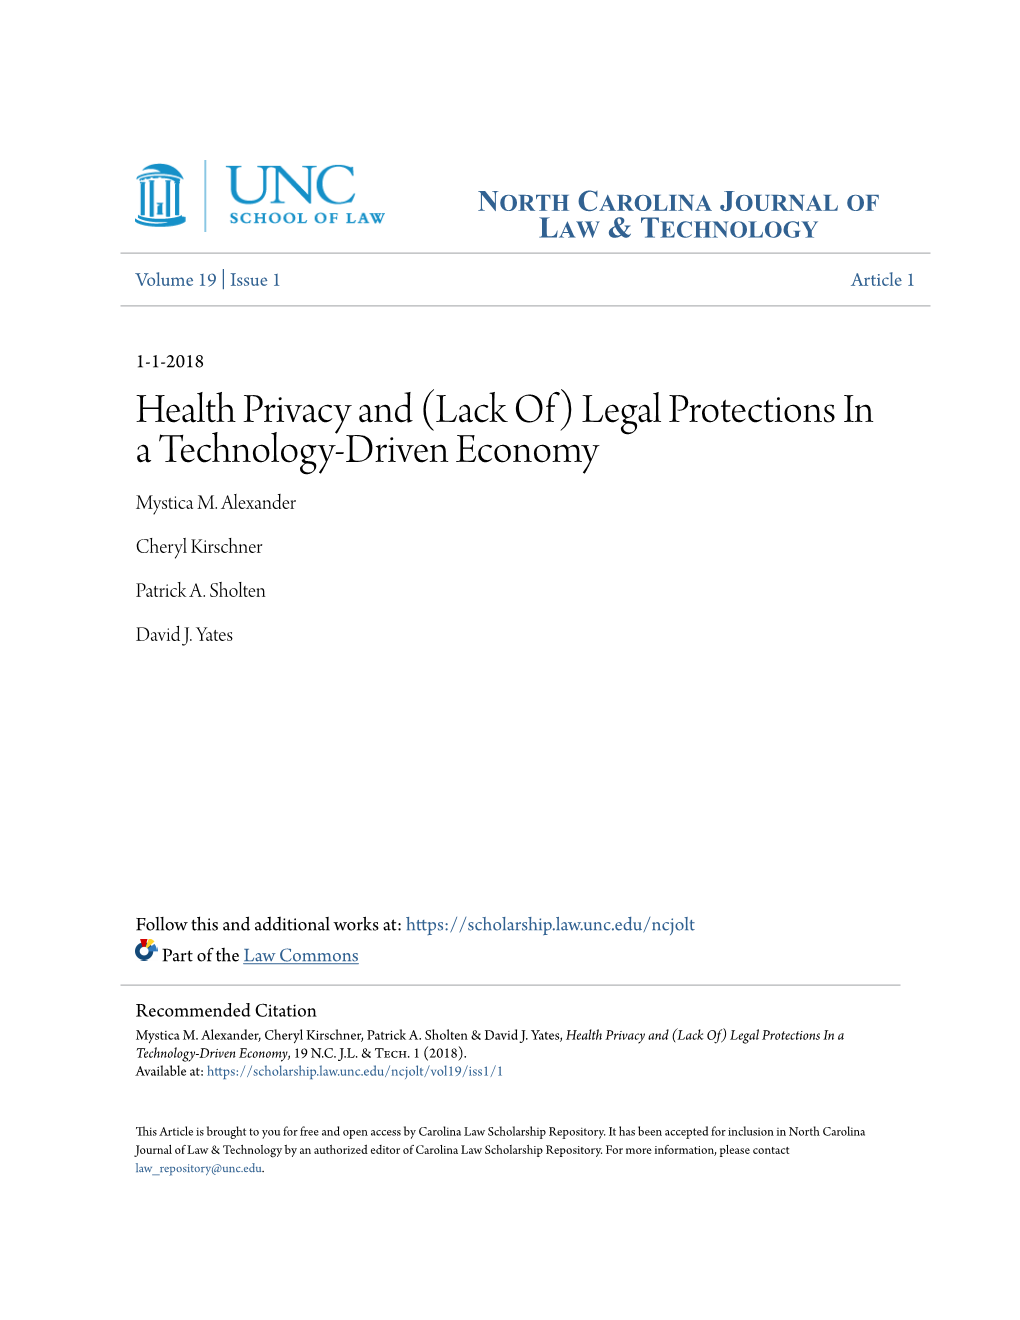 Health Privacy and (Lack Of) Legal Protections in a Technology-Driven Economy Mystica M